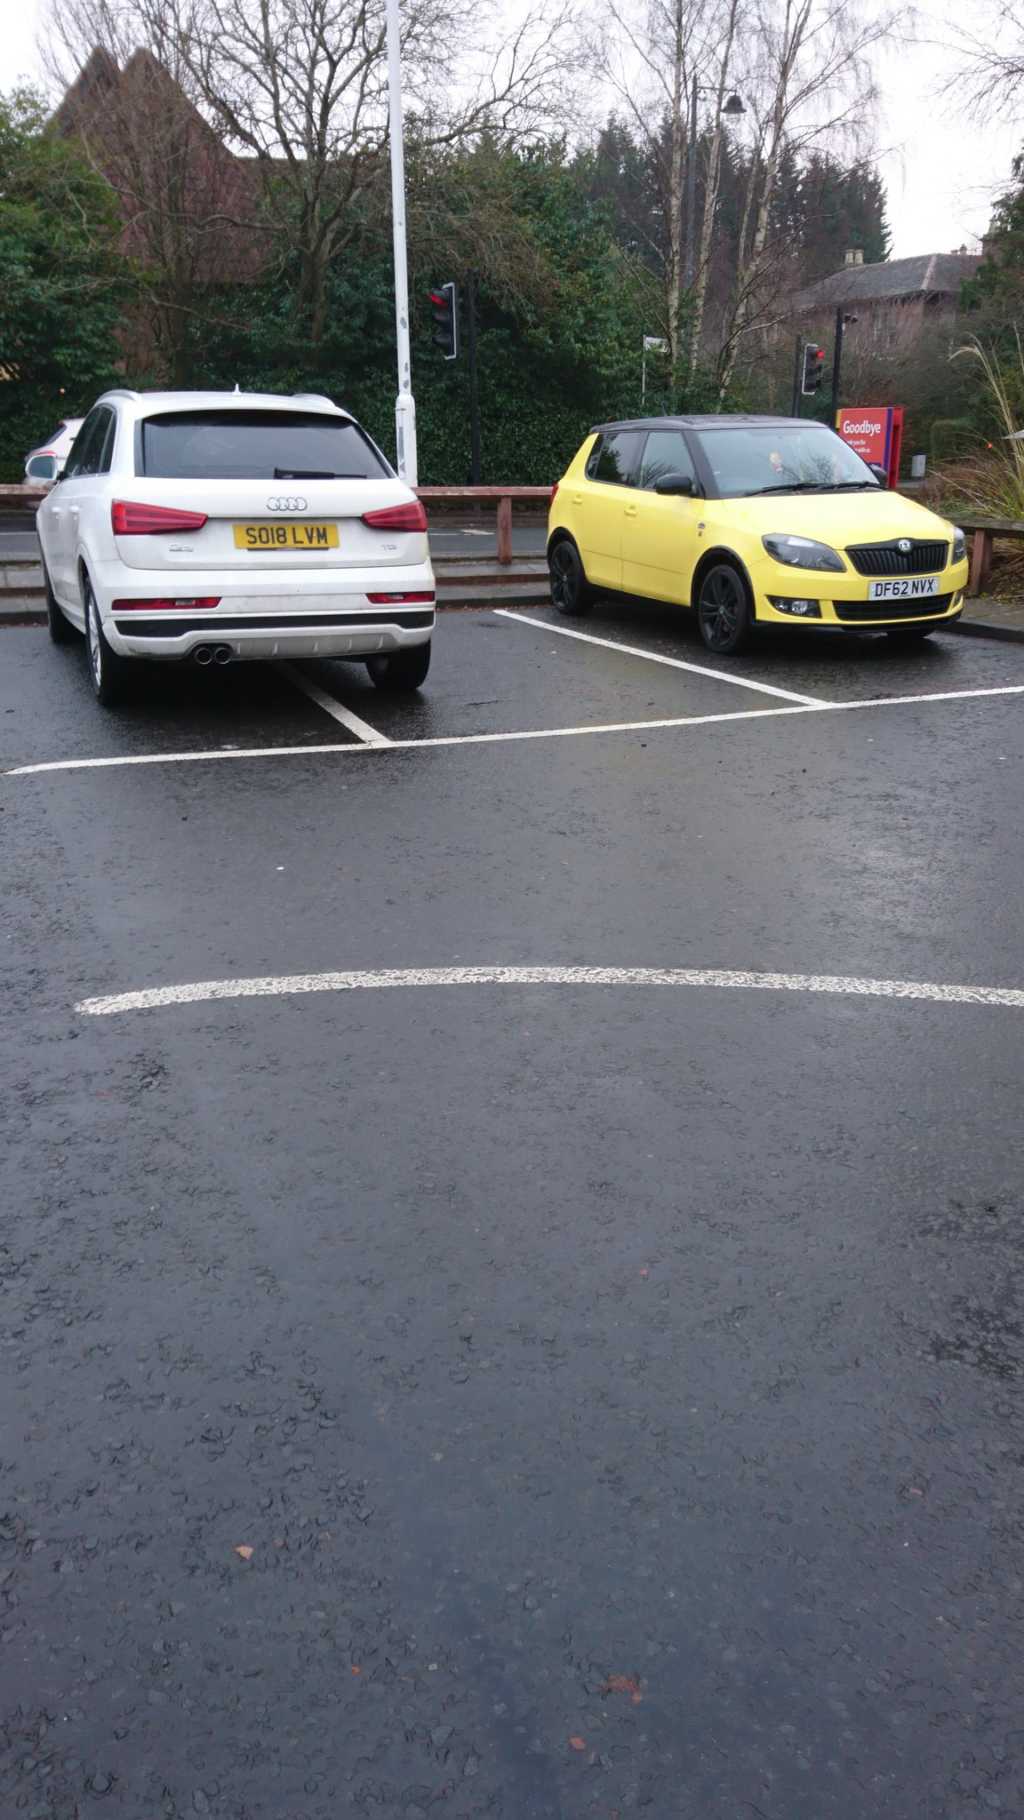 SO18 LVM is an Inconsiderate Parker